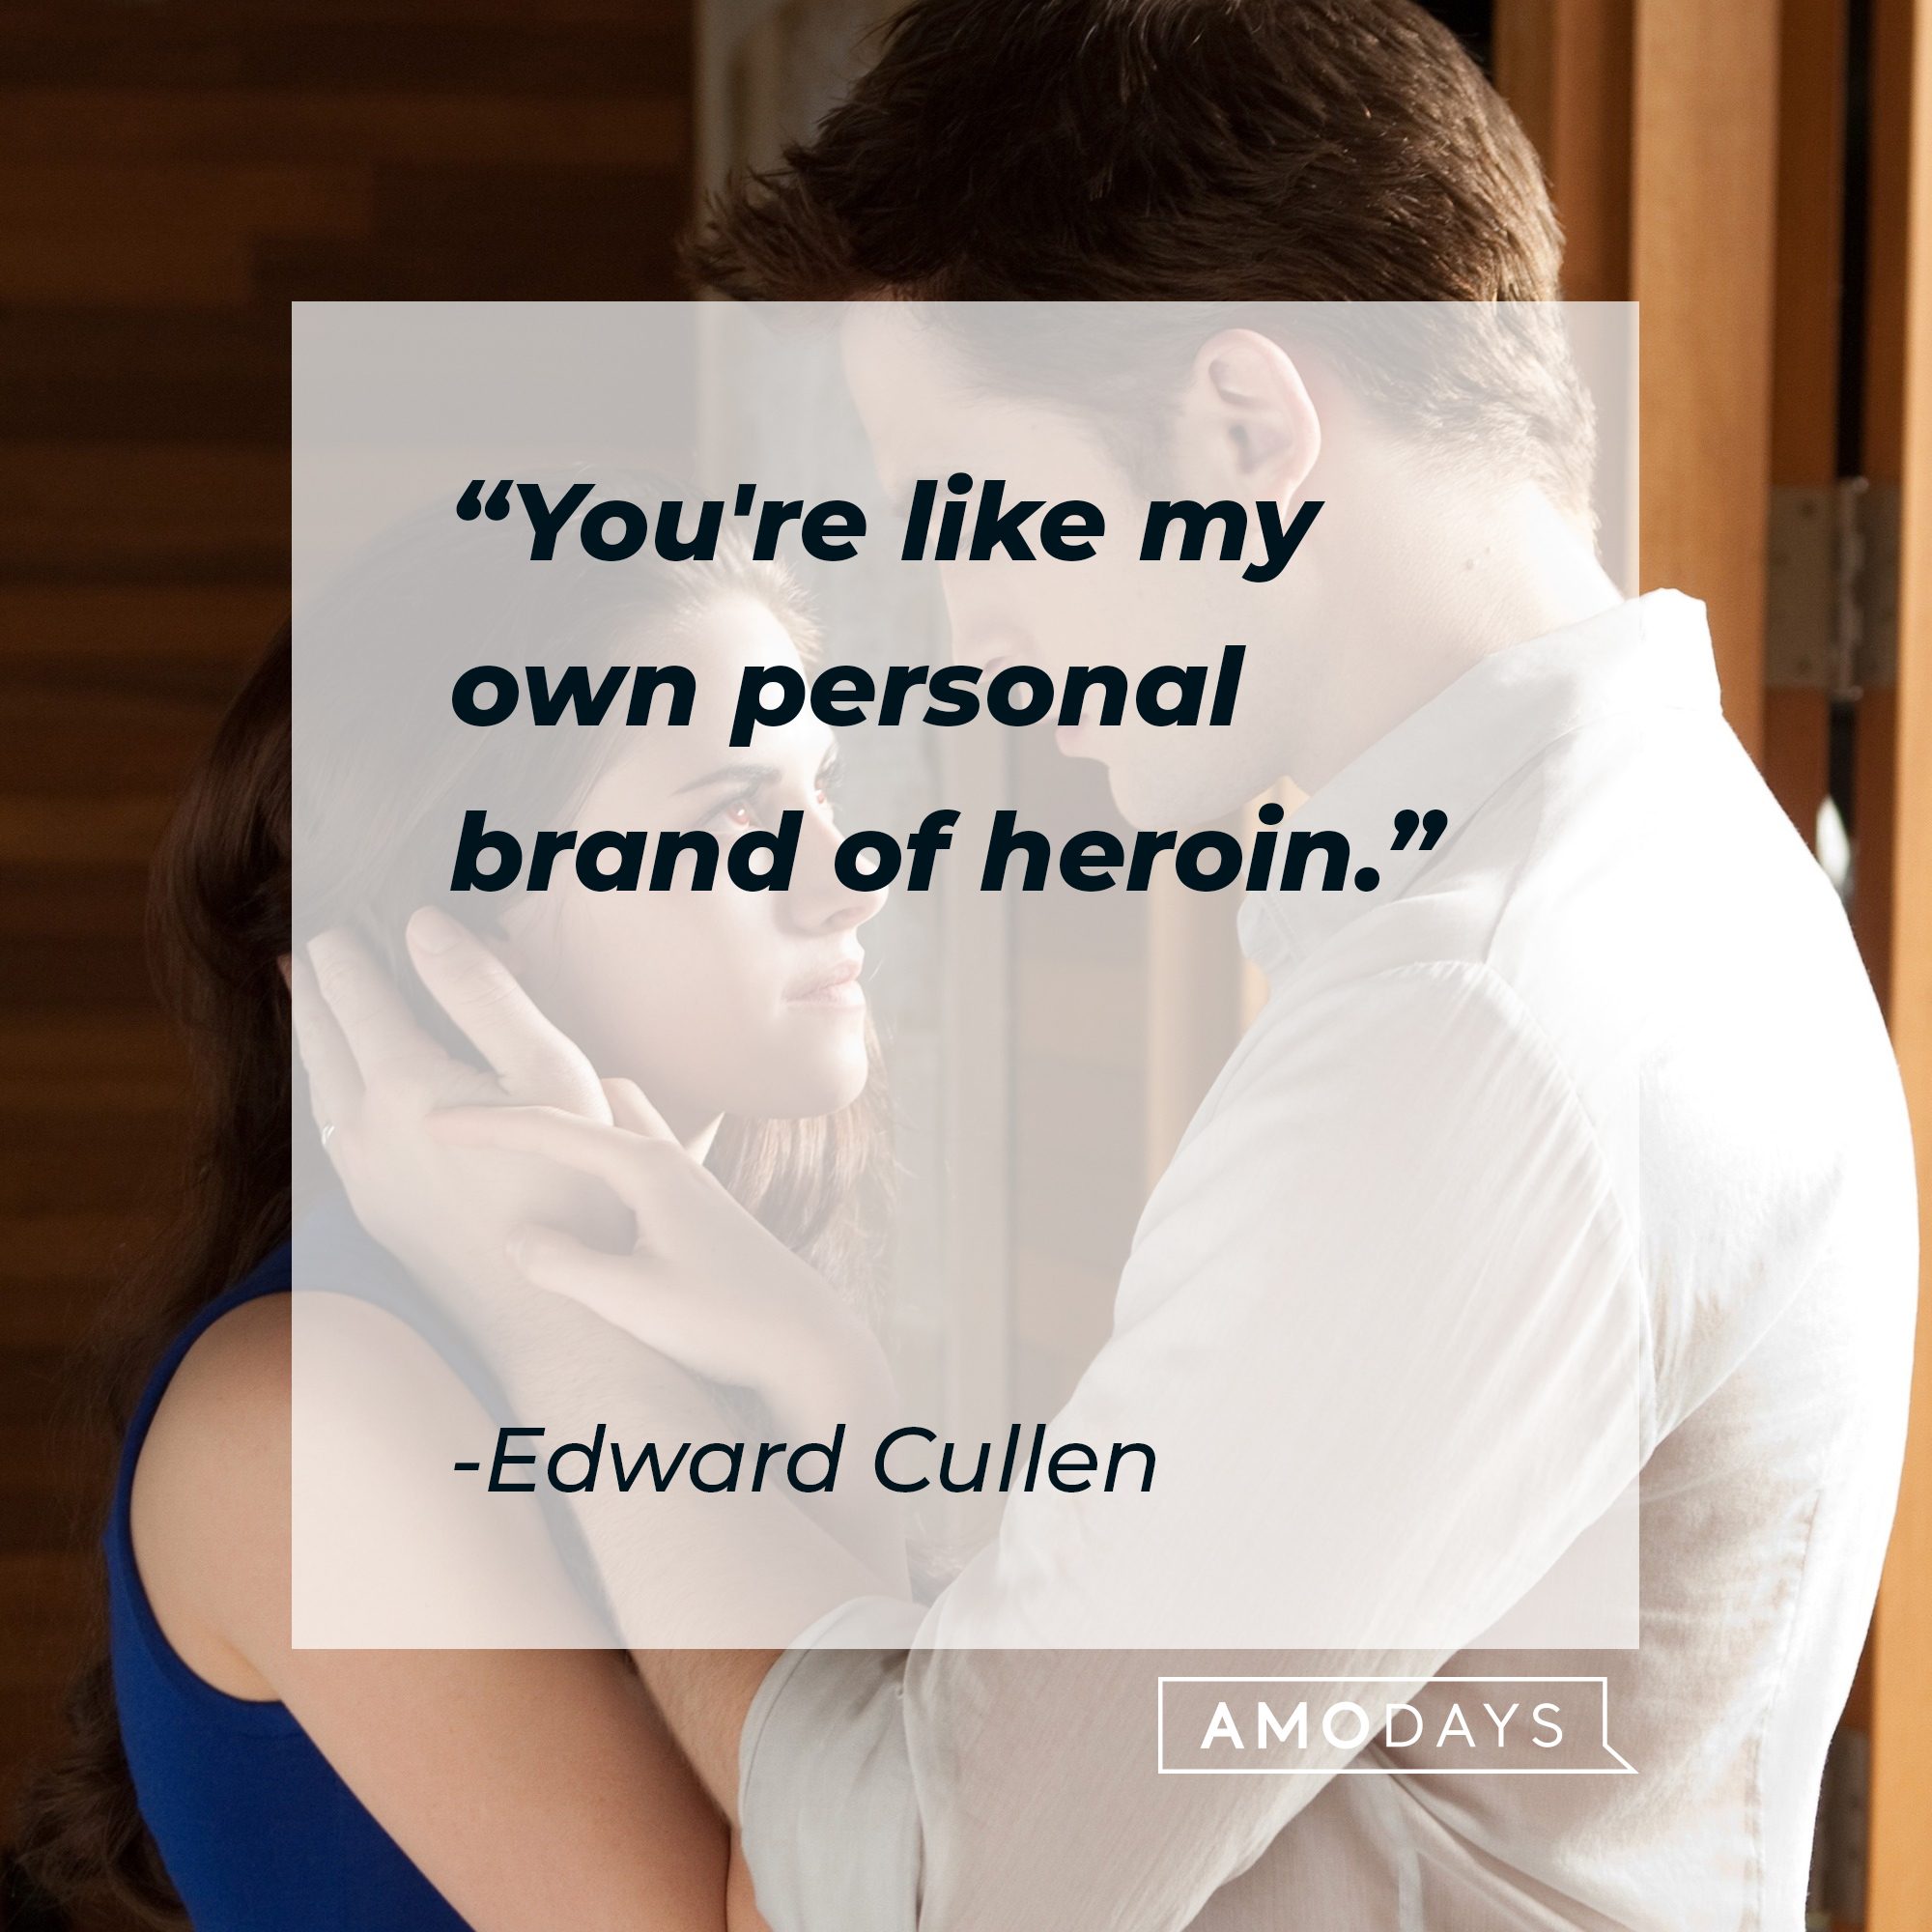 An image of Edward Cullen and Bella Swan, with Cullen’s quote: "You're like my own personal brand of heroin." | Source: Facebook.com/twilight